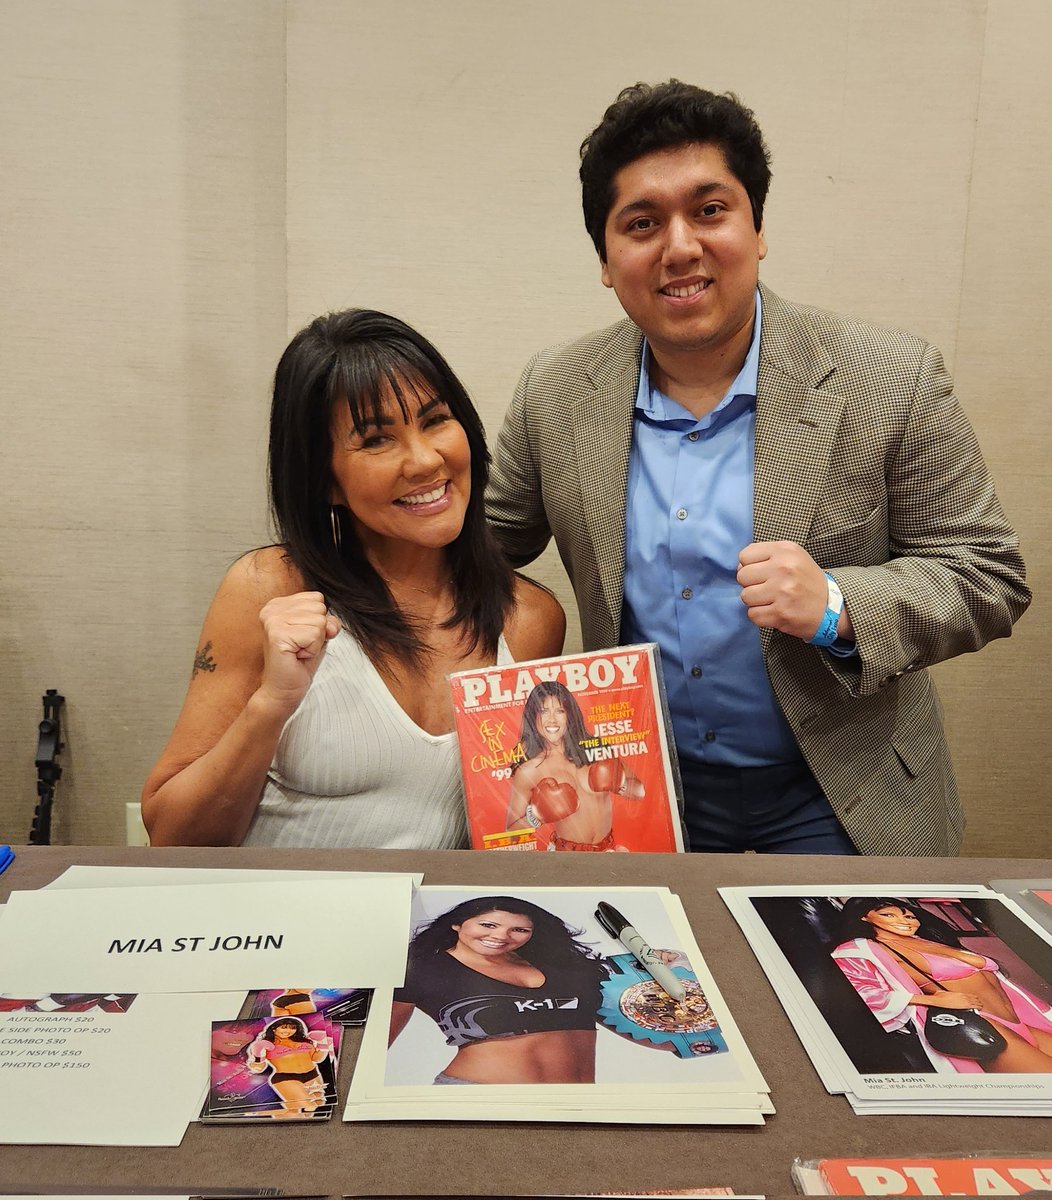 Happy Birthday to @MiaStJohnBoxer 5 time World Boxing Champion and Mental Health Speaker!
#boxingday #boxingworld #boxinglove #boxing #boxingtraining #proboxing #knockout #boxingdrills #boxingfitness #boxingfan #boxingnight #boxingnews #boxingclub #boxingring #titleboxing #fight